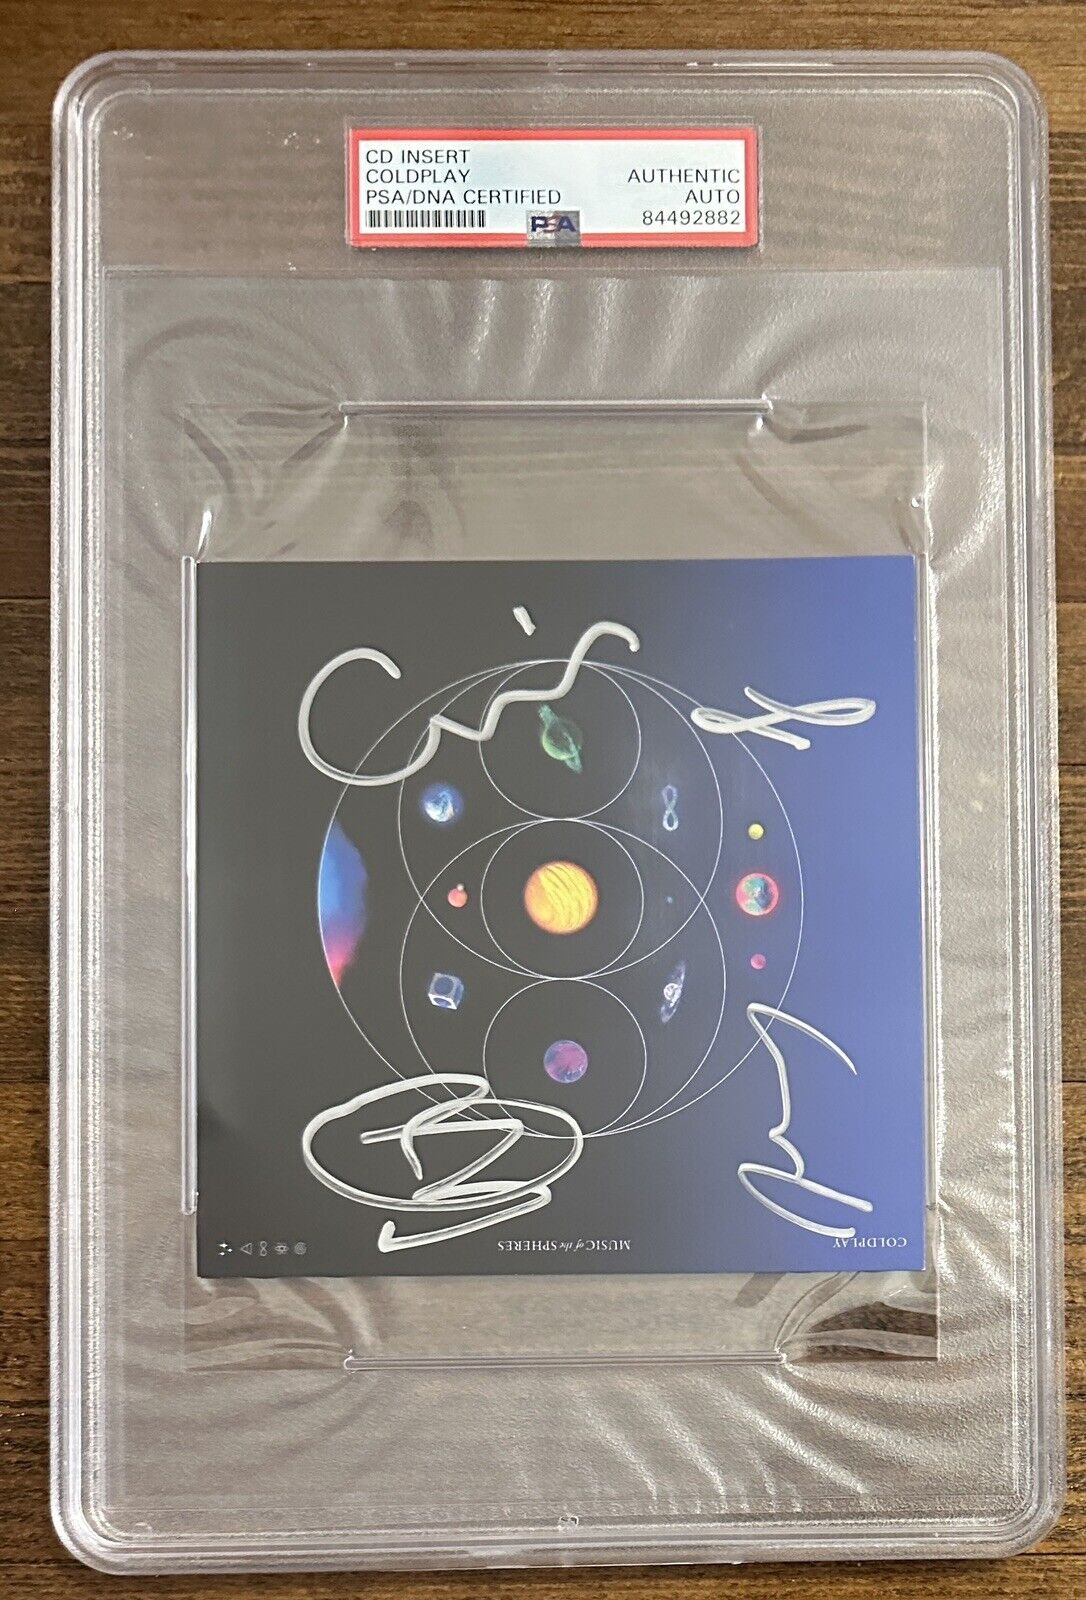 COLDPLAY FULL BAND SIGNED MUSIC OF THE SPHERES CD COVER CARD PSA DNA AUTOGRAPH